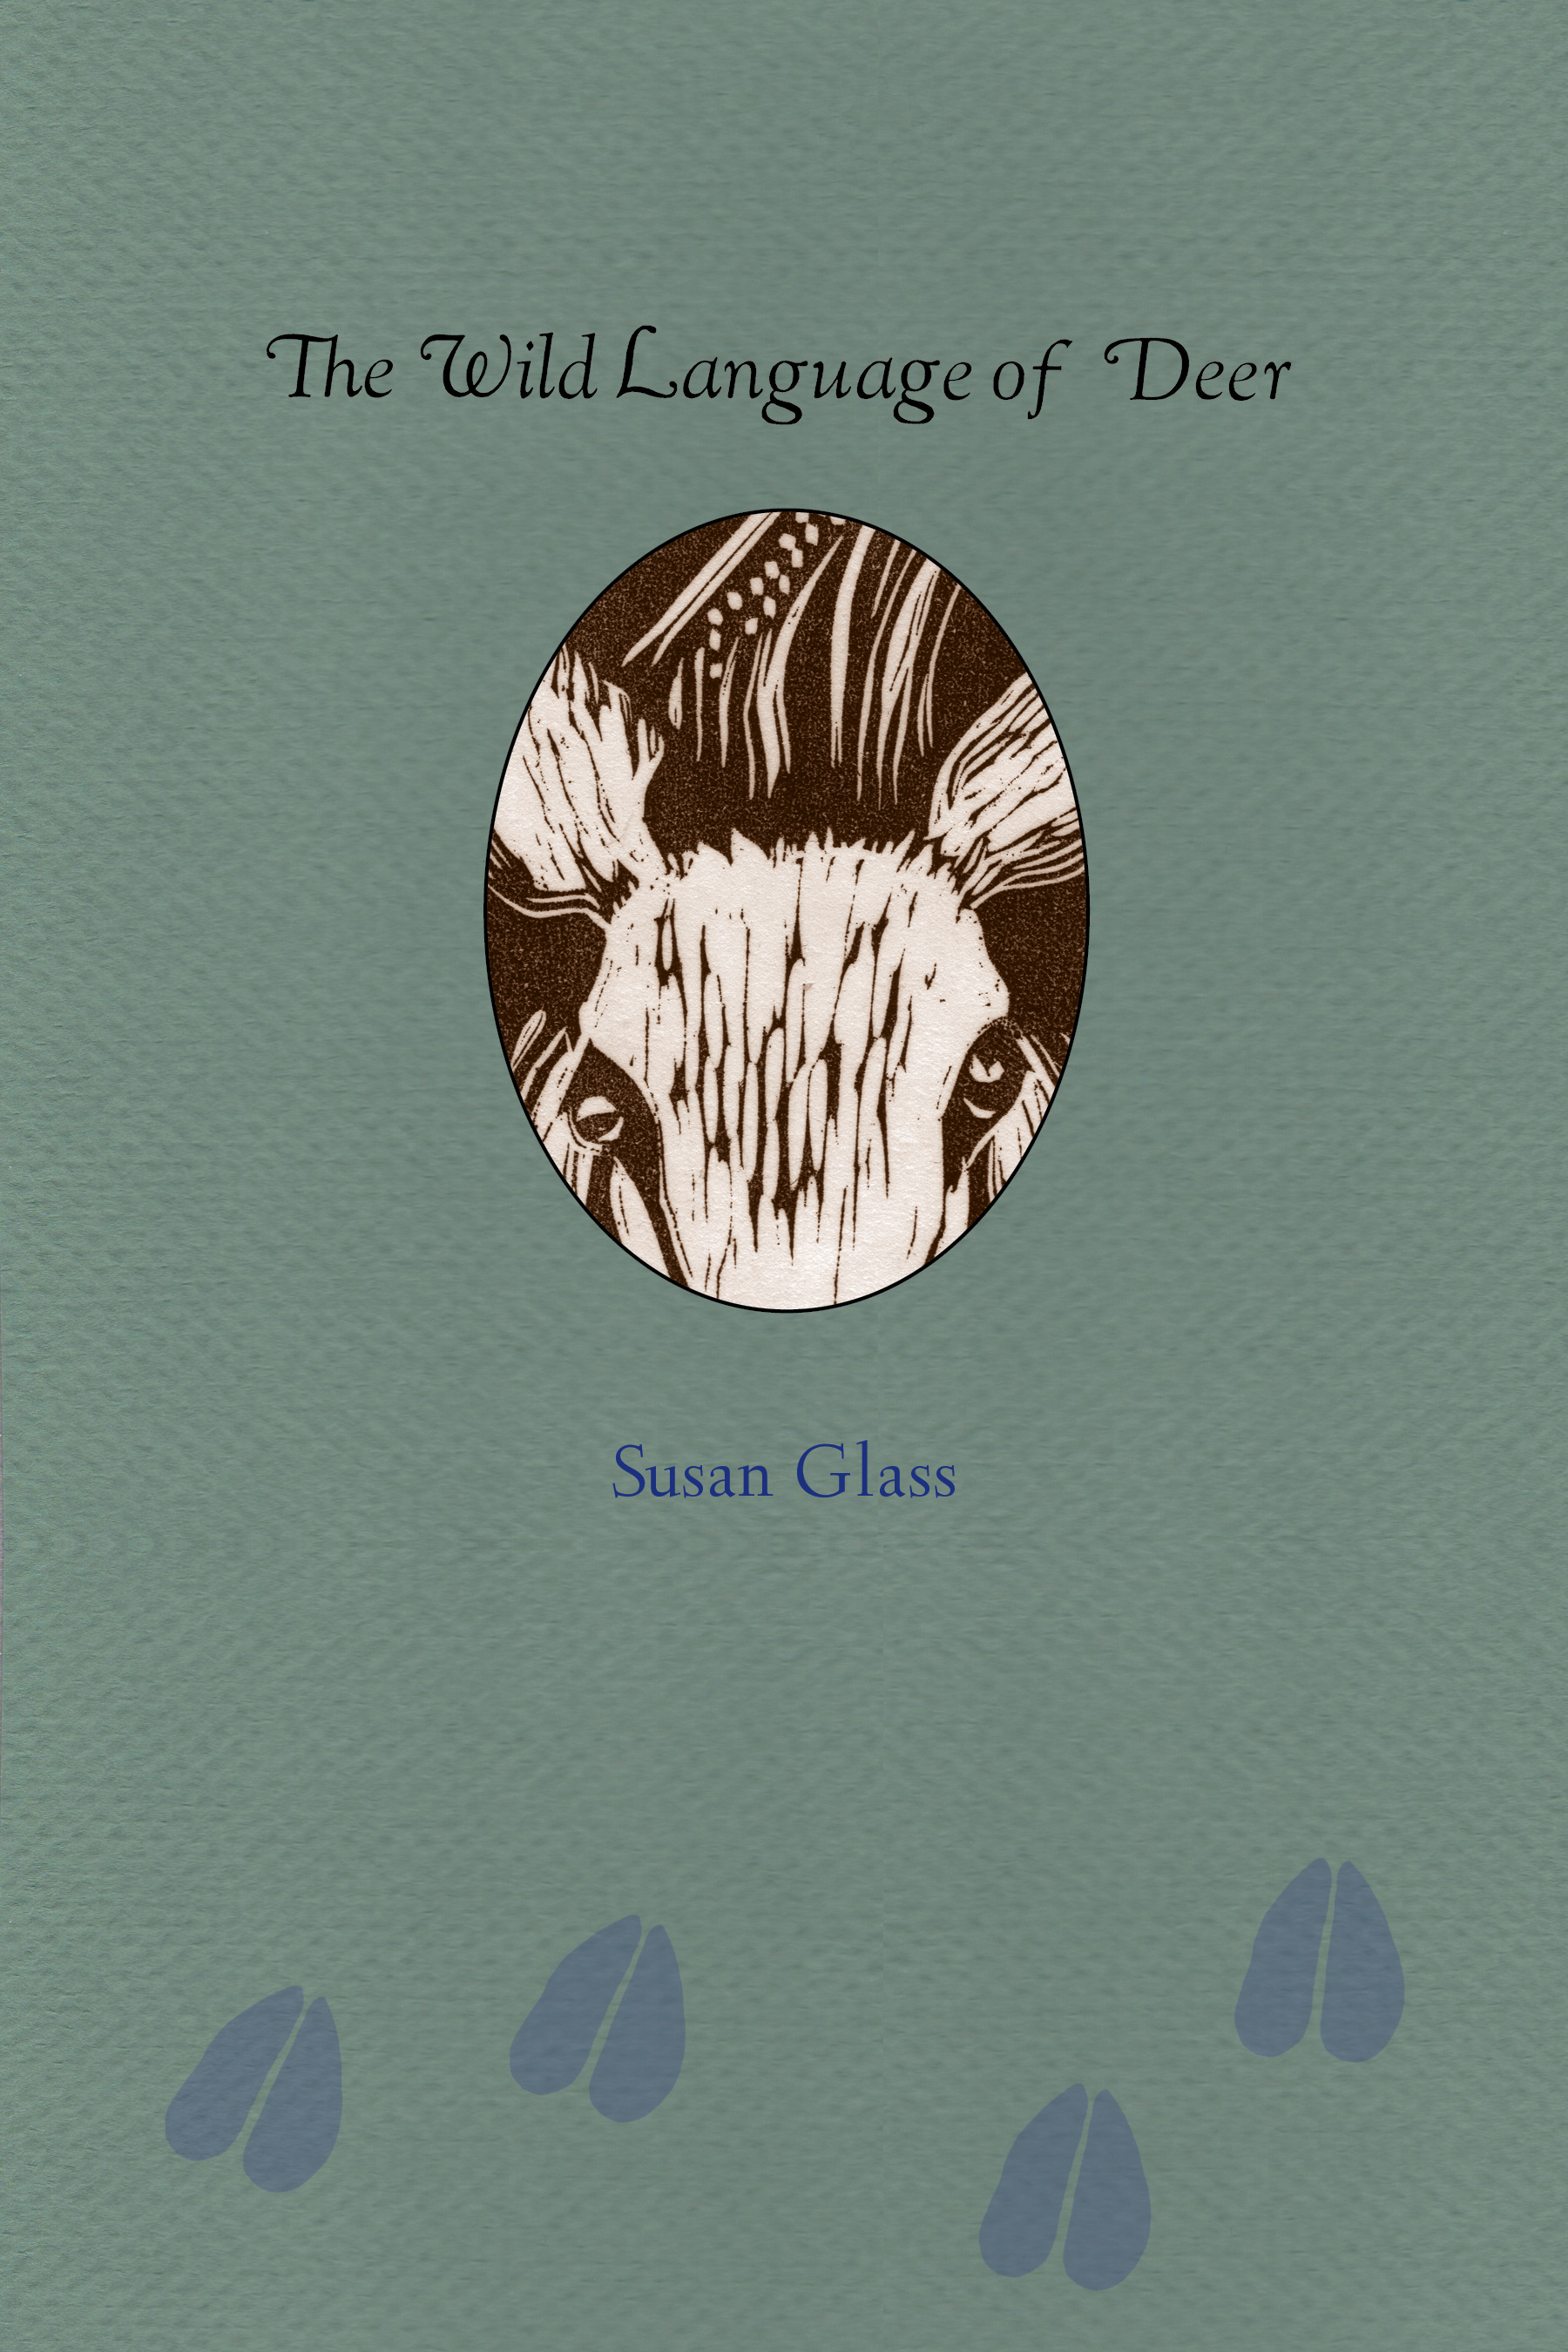 The Wild Language of Deer by Susan Glass